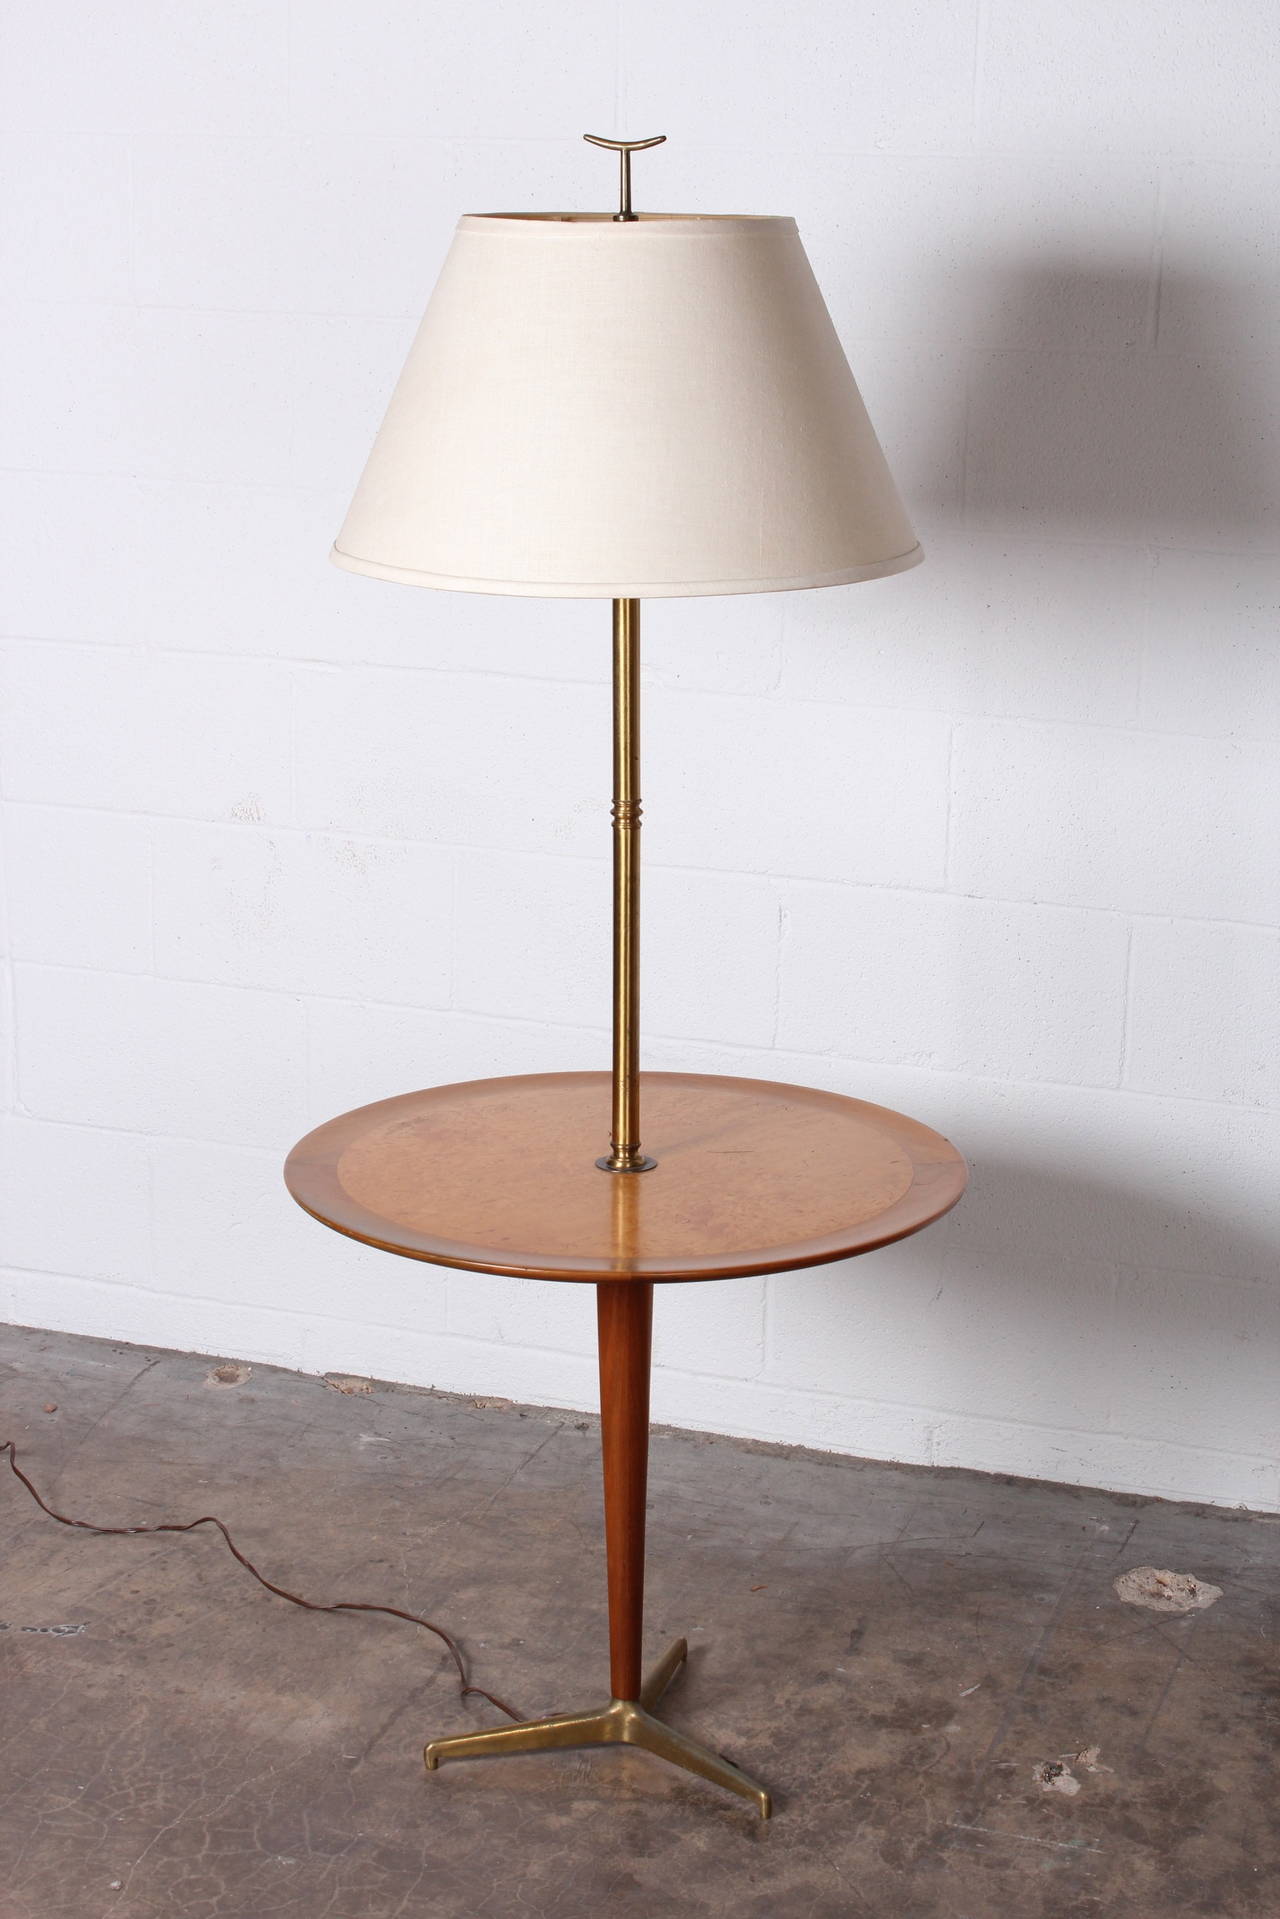 A rare floor lamp with attached table. Designed by Edward Wormley for Dunbar.